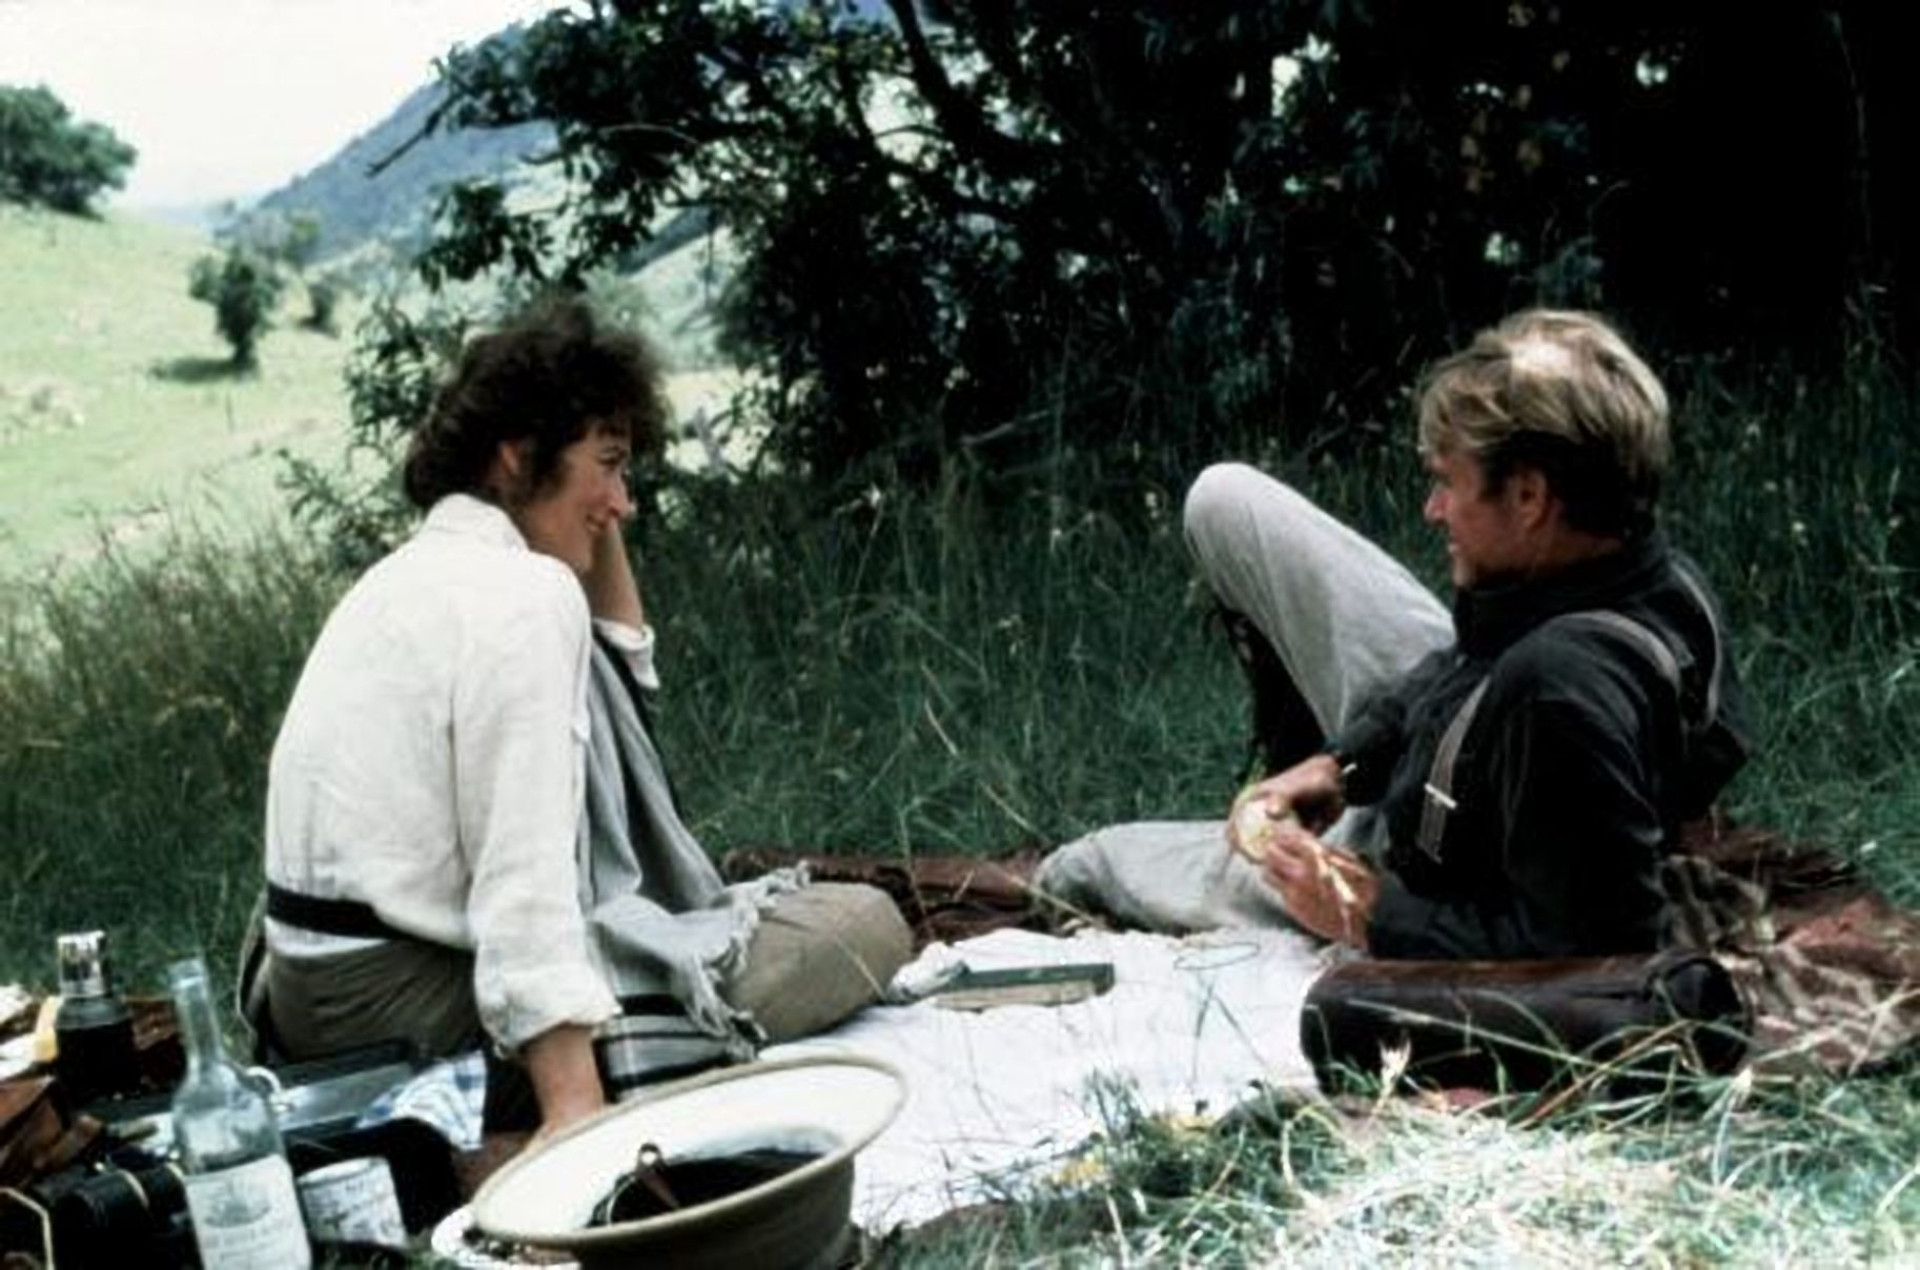 Explore 20th-century Kenya through the lens of Meryl Streep and Robert Redford’s passionate love affair amidst the African savannas and rich rolling landscape.<p>You may also like:<a href="https://www.starsinsider.com/n/423339?utm_source=msn.com&utm_medium=display&utm_campaign=referral_description&utm_content=356239v4en-us"> The biggest child star success stories</a></p>